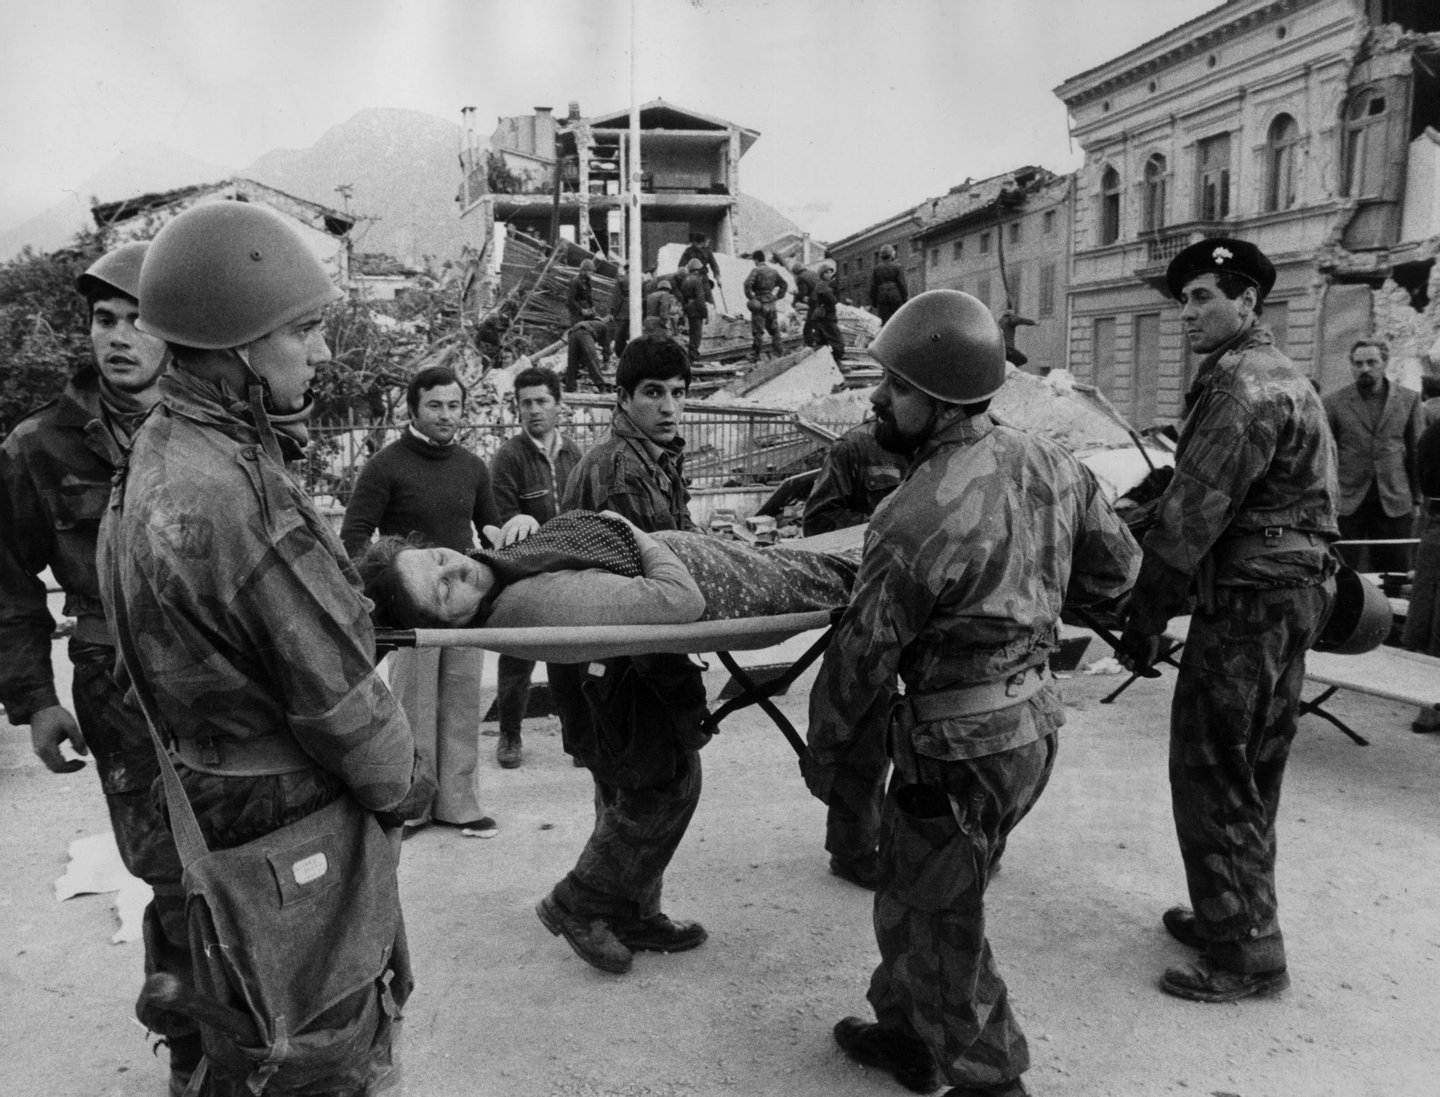 May 1976: Italian soldiers carry a woman on a stretcher to a place of safety after she was dug from the remains of her home after an earthquake in Udine which killed over a 1,000 people. (Photo by Livio Fioroni/Keystone/Getty Images)